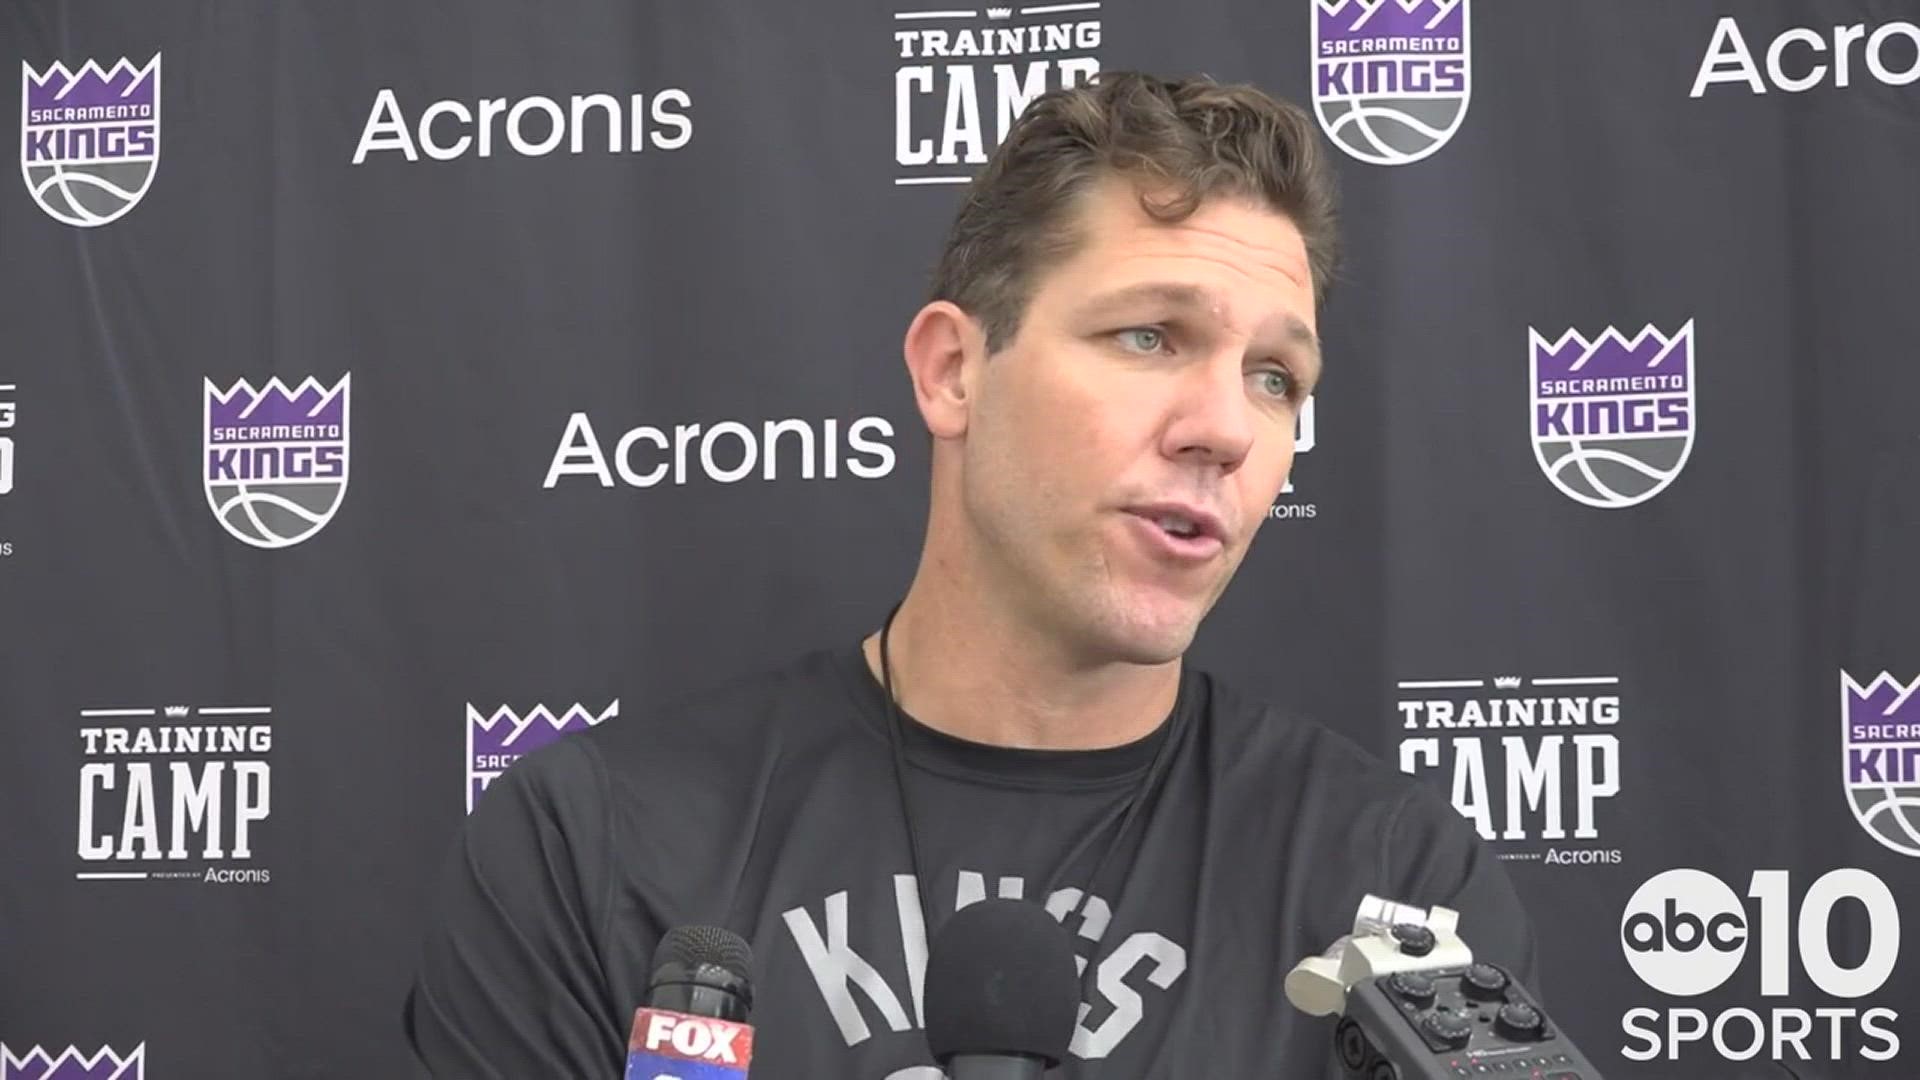 Kings' head coach Luke Walton meets with the media on the opening of Kings training camp in Sacramento to talk about his impressions of the first week of competition